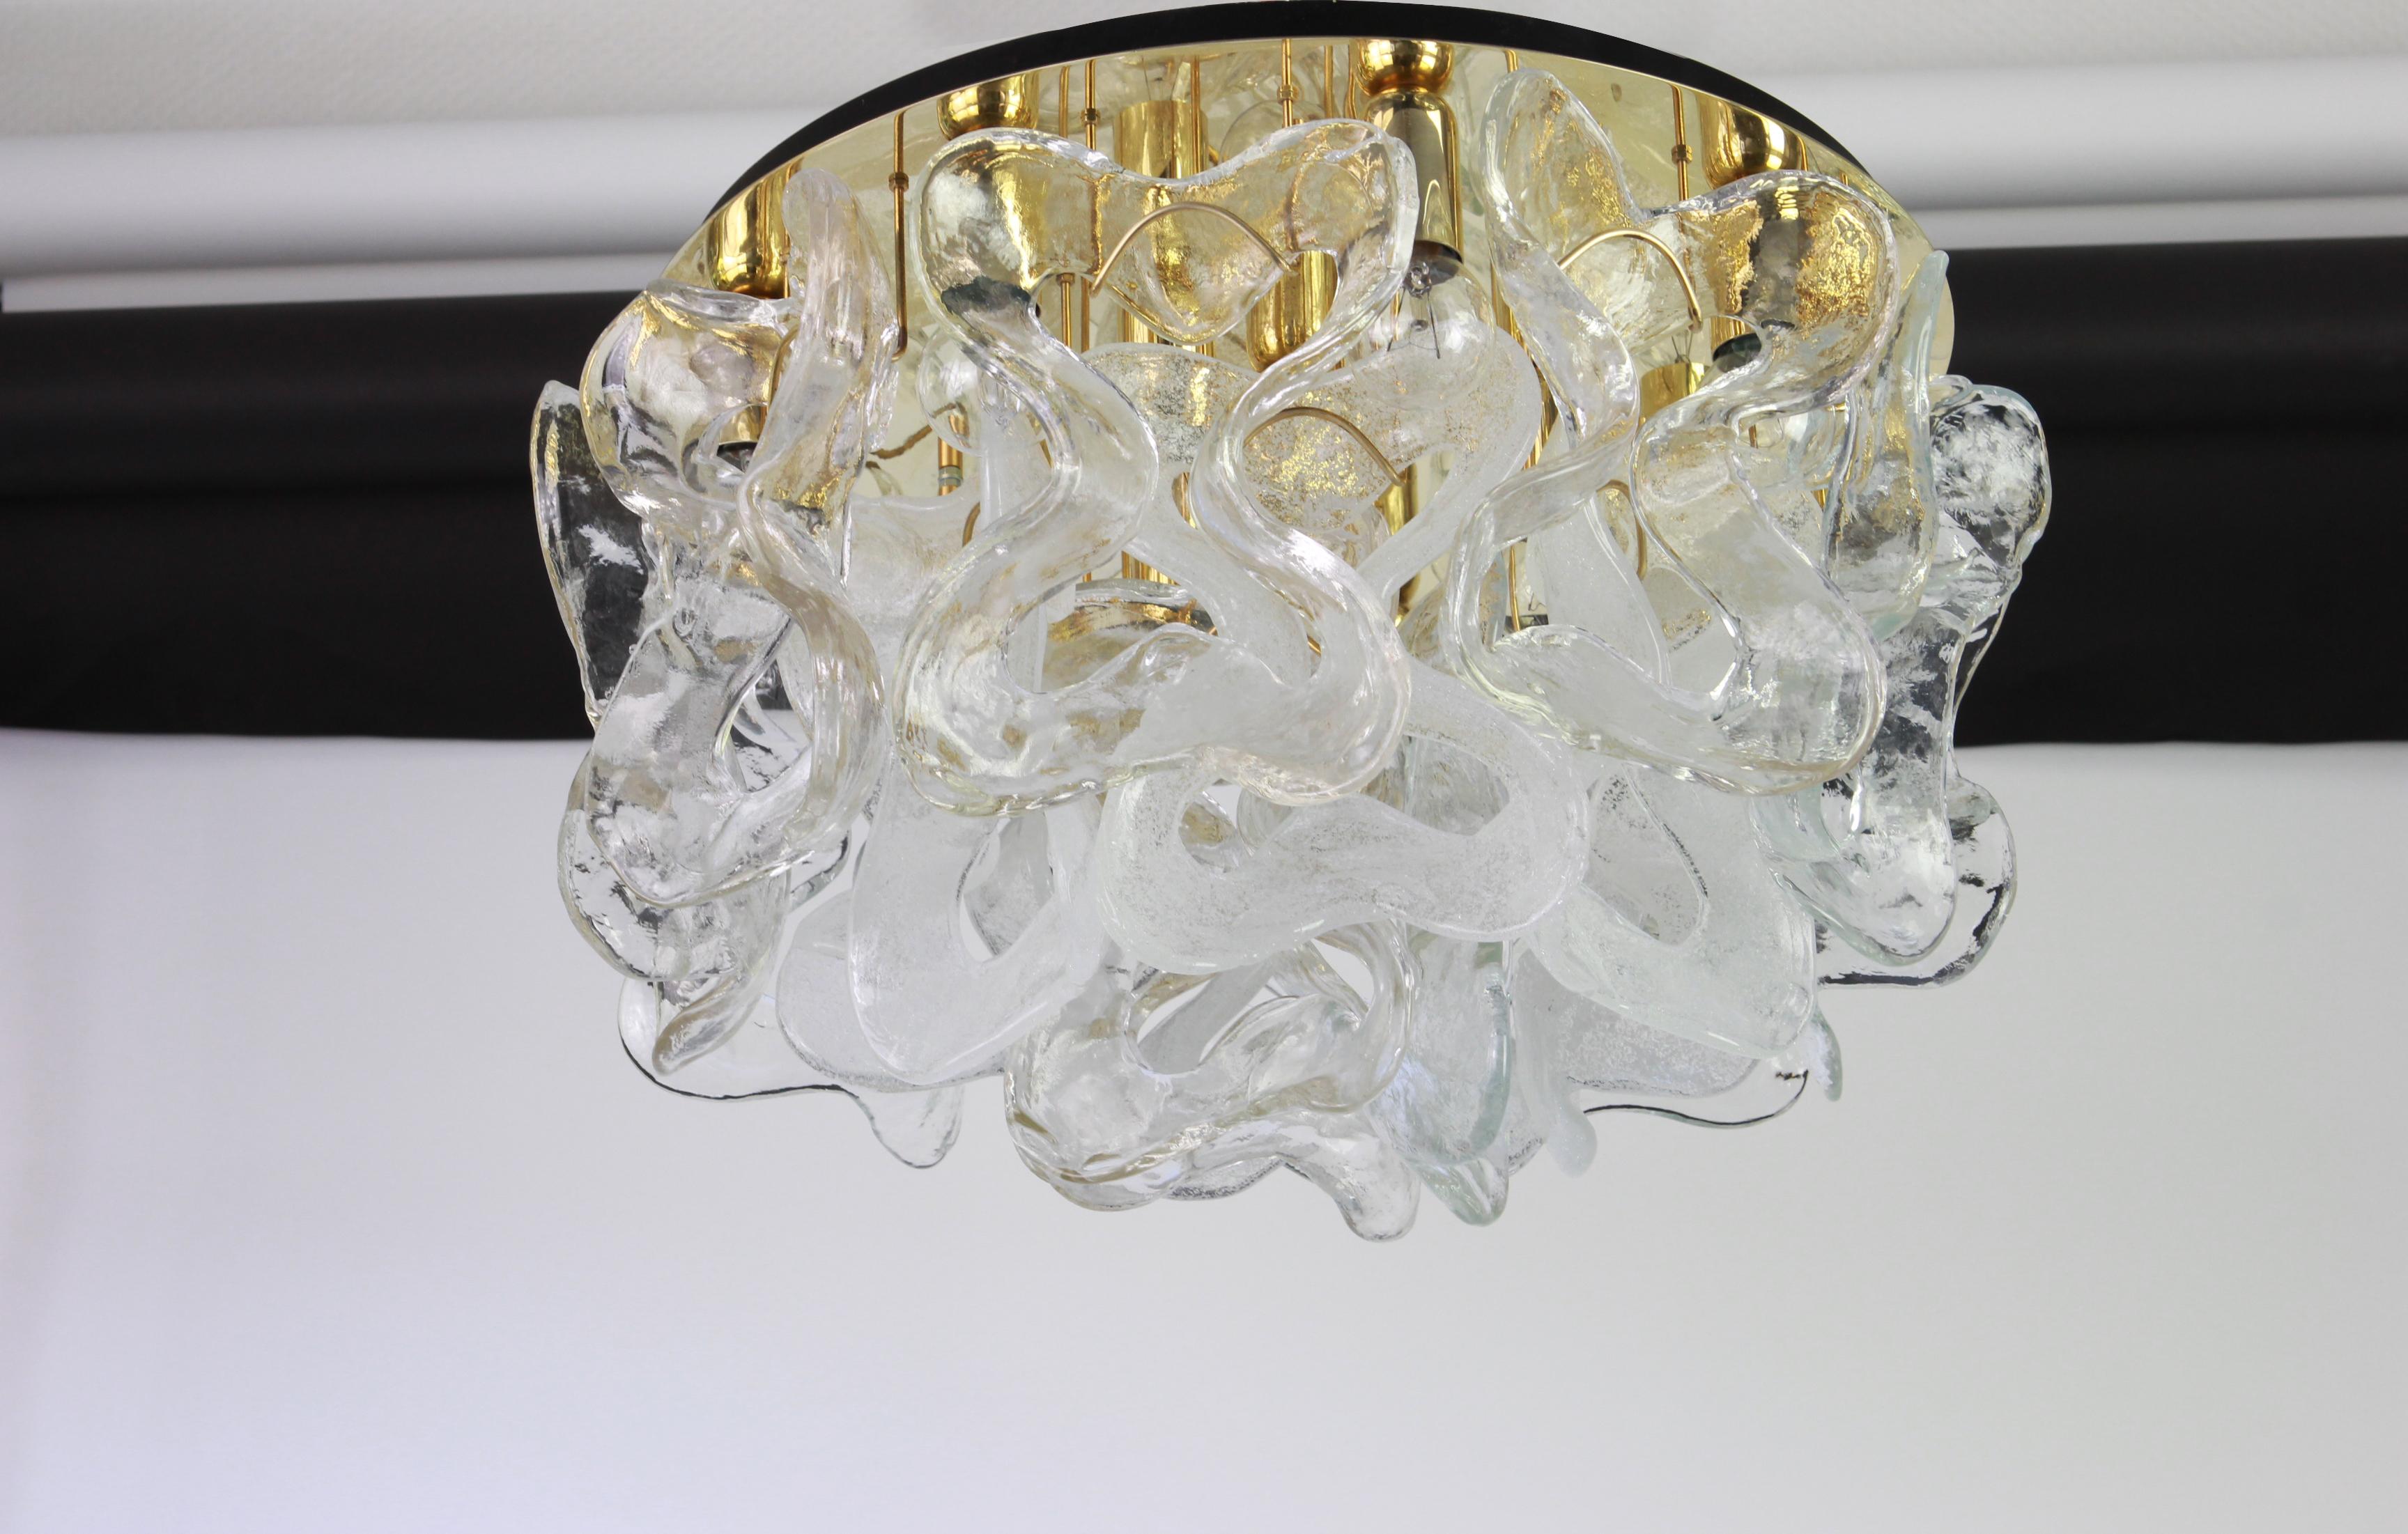 German Large Catena Ceiling Fixture with Murano Glasses by Kalmar, Austria, 1960s For Sale